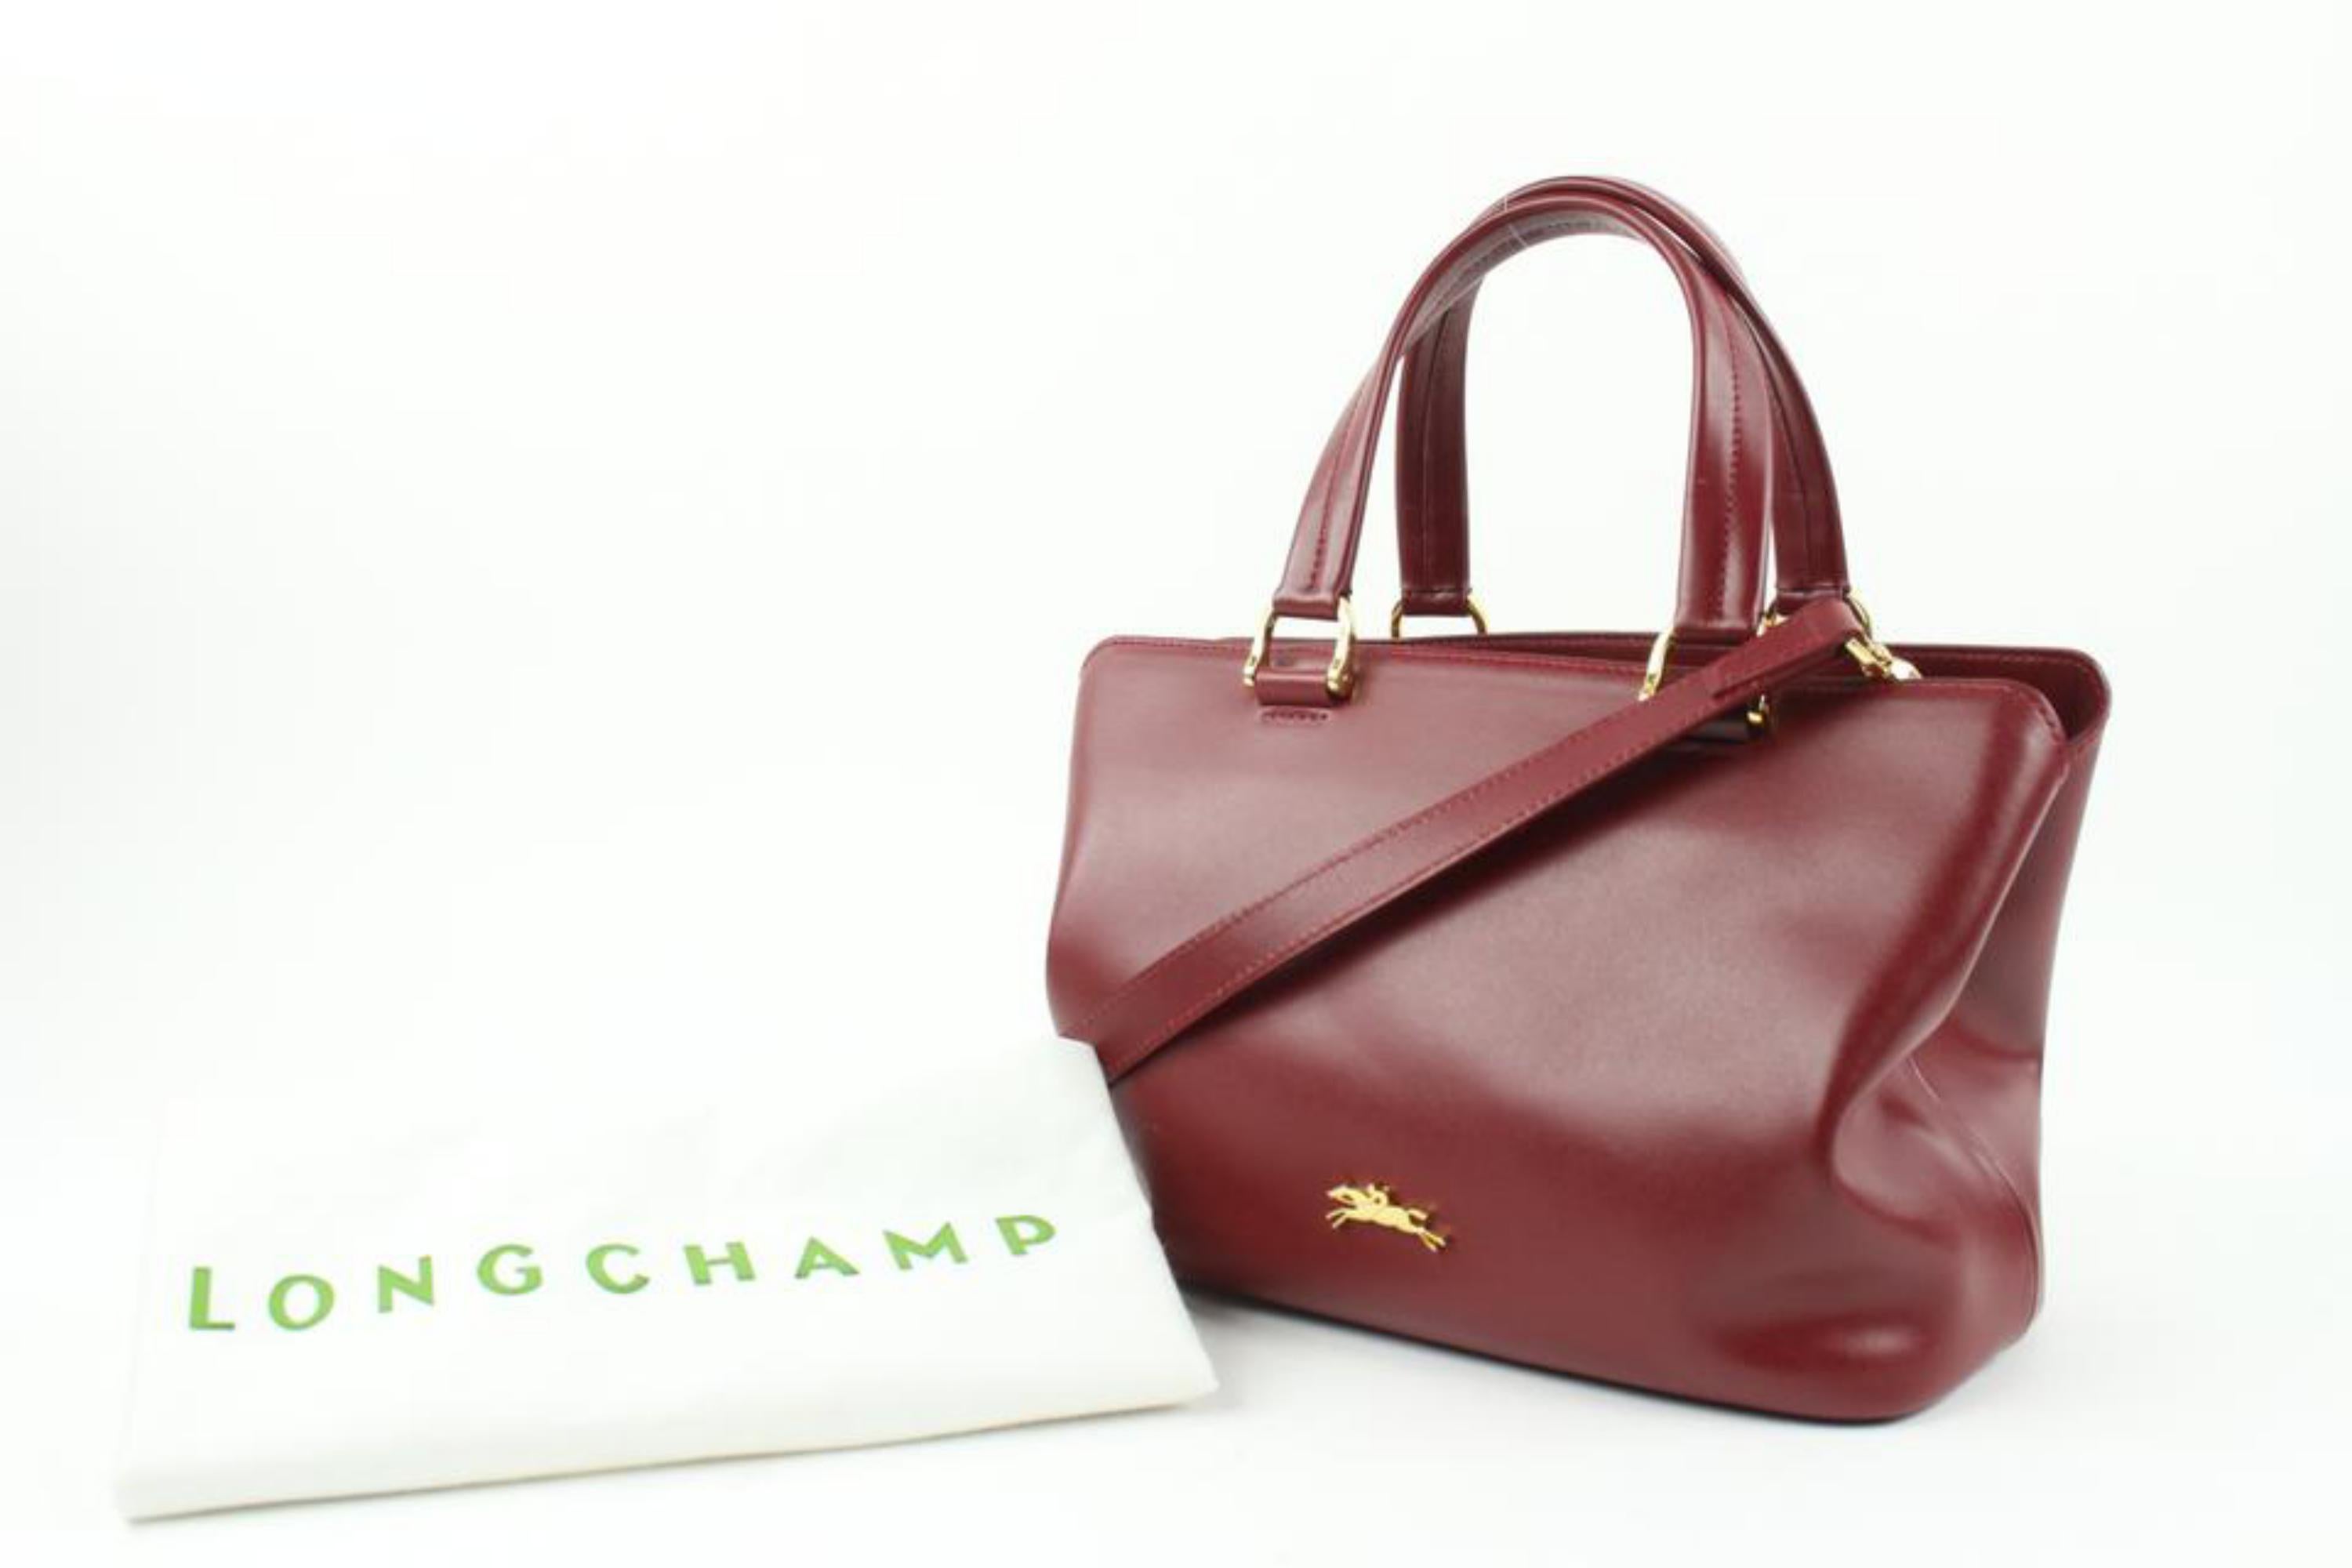 Longchamp Dark Red Burgundy Leather 2way Tote Bag with Strap 10LC113
Date Code/Serial Number: 1008445 1099831609
Made In: France
Measurements: Length: 11.5 